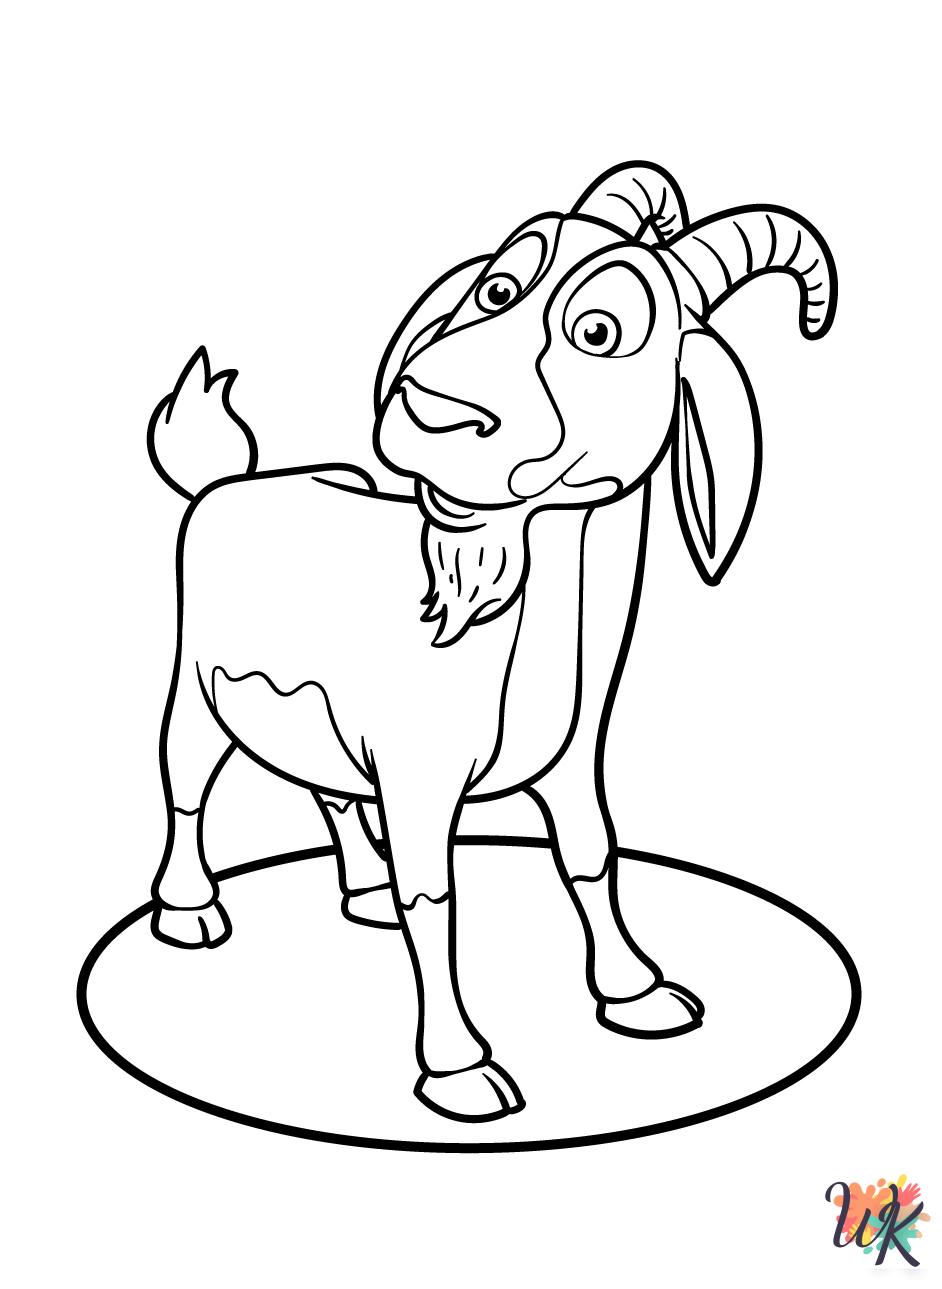 Goats coloring pages to print